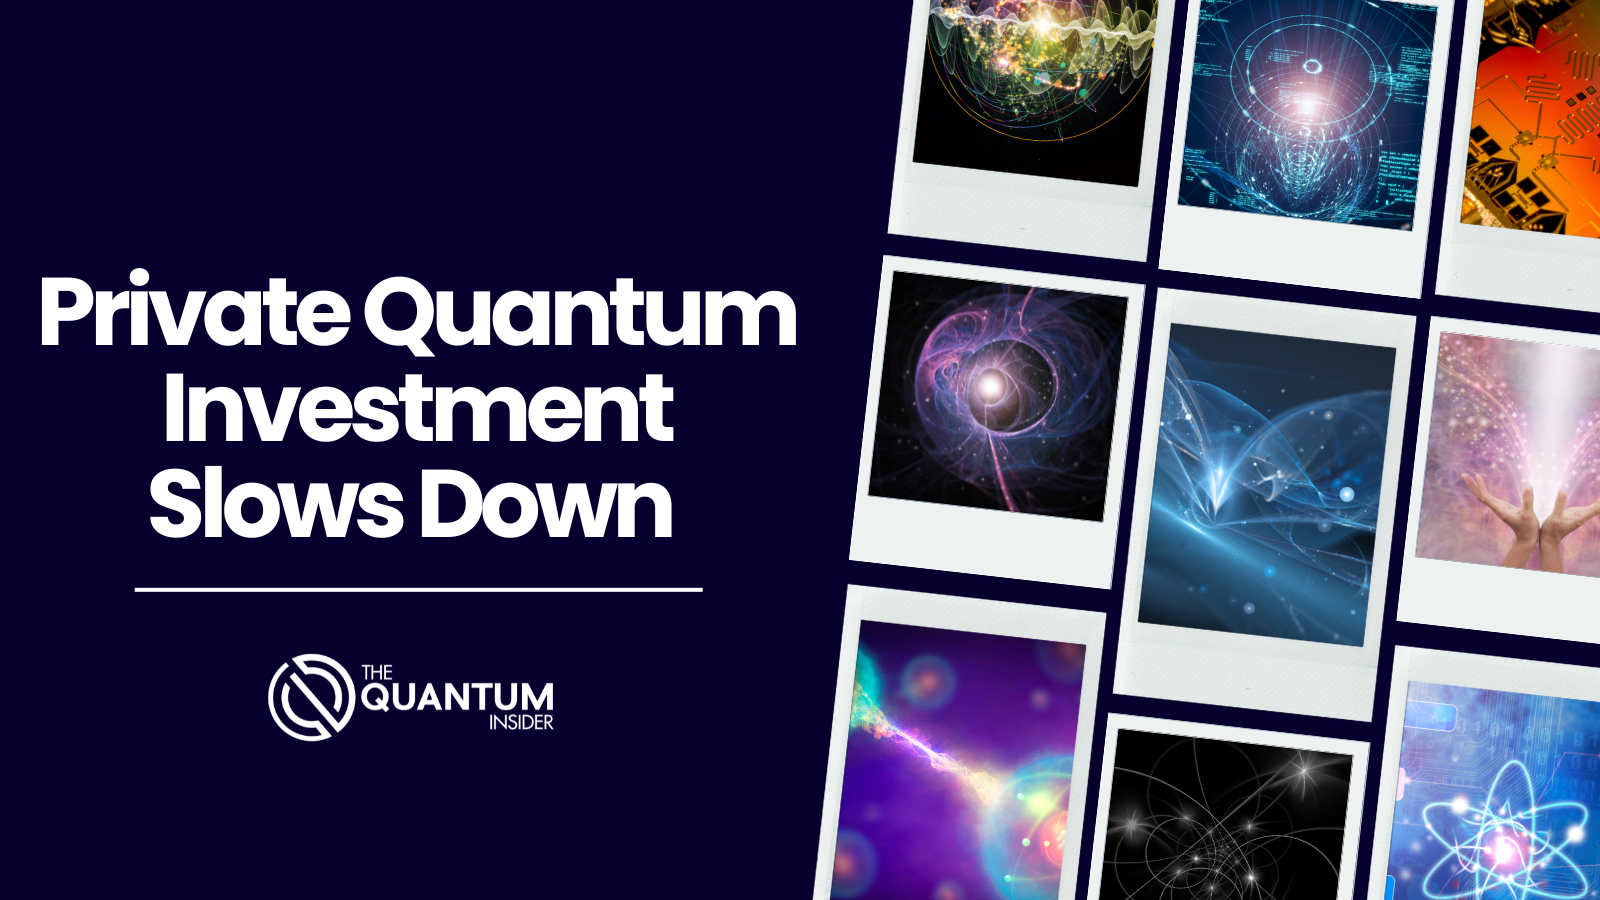 Signs of a Private Quantum Investment Slowdown in First Half of 2023